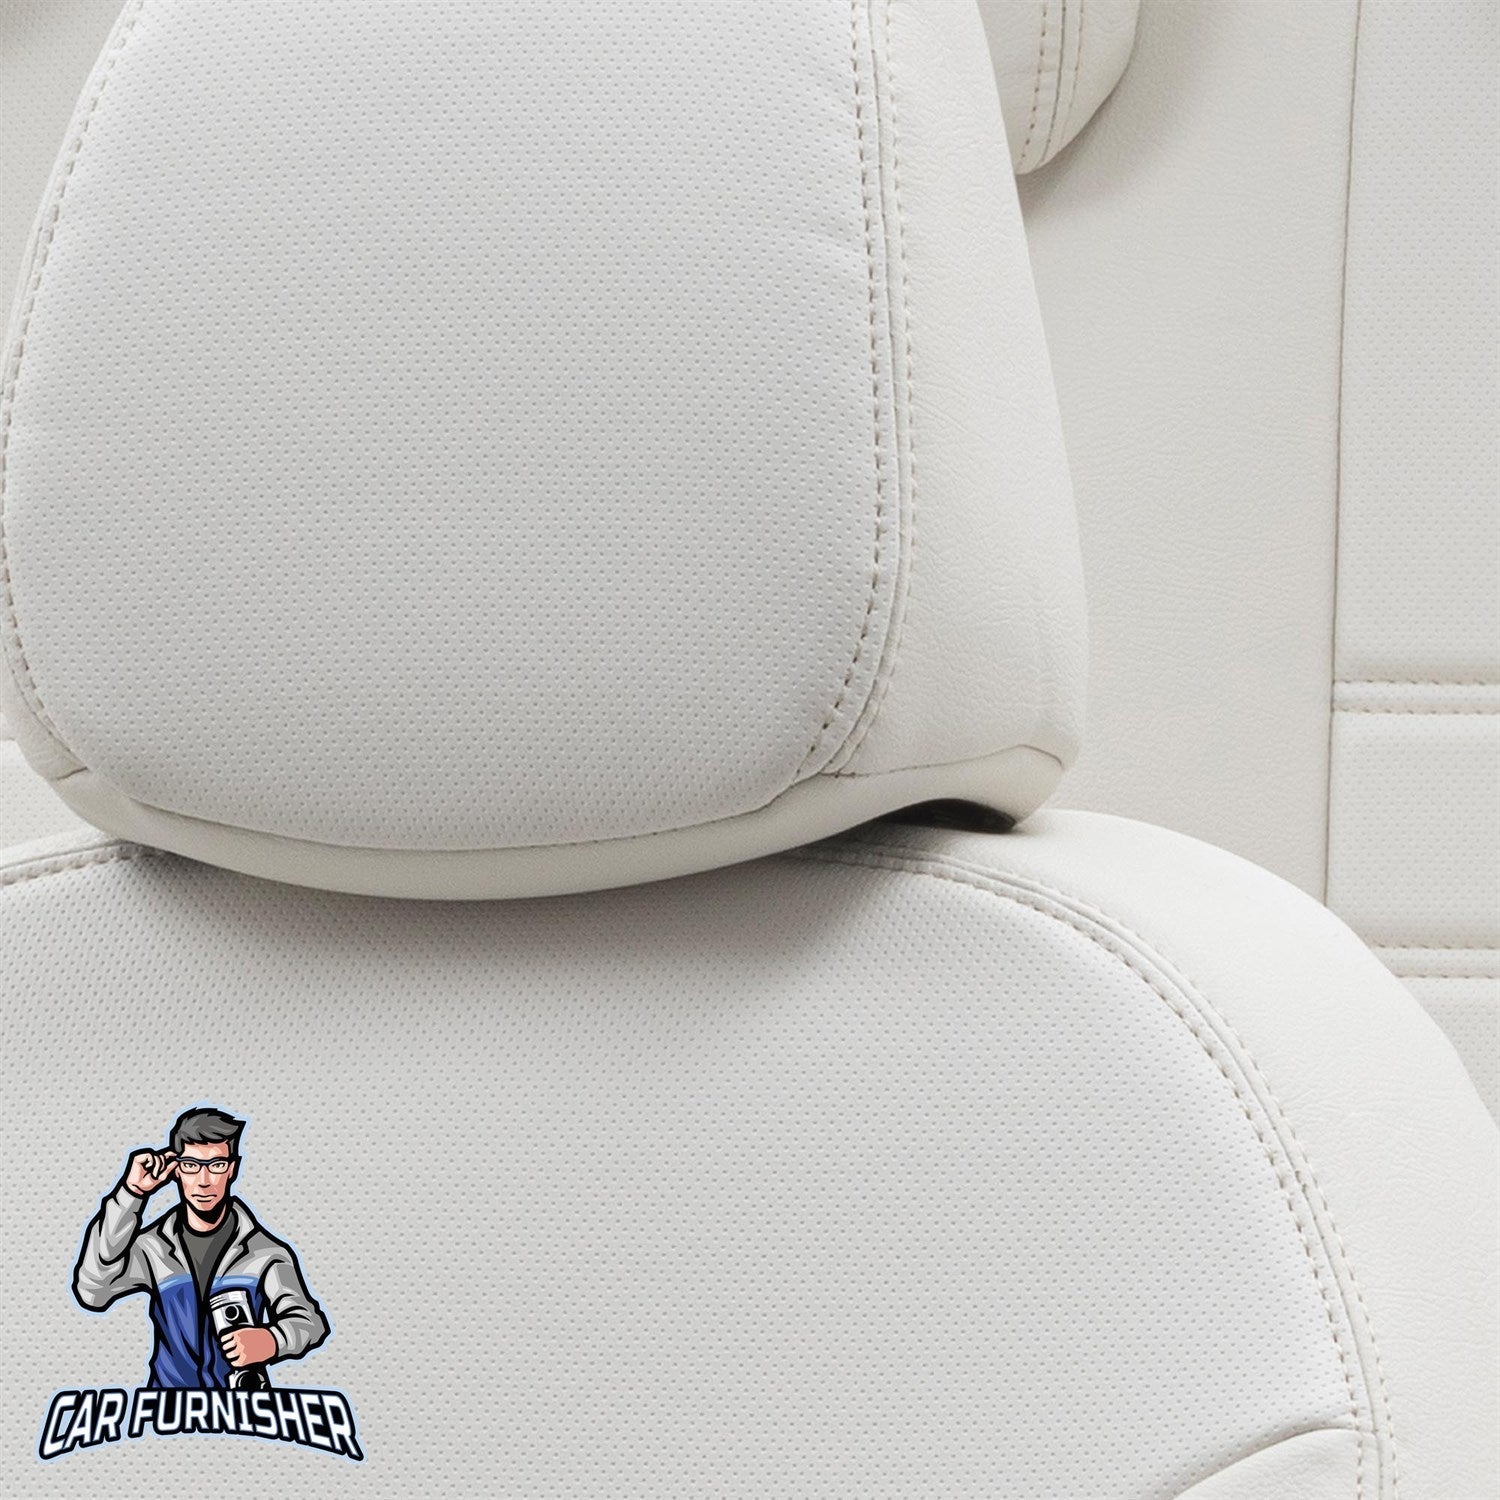 Hyundai Bayon Seat Covers Istanbul Leather Design Ivory Leather